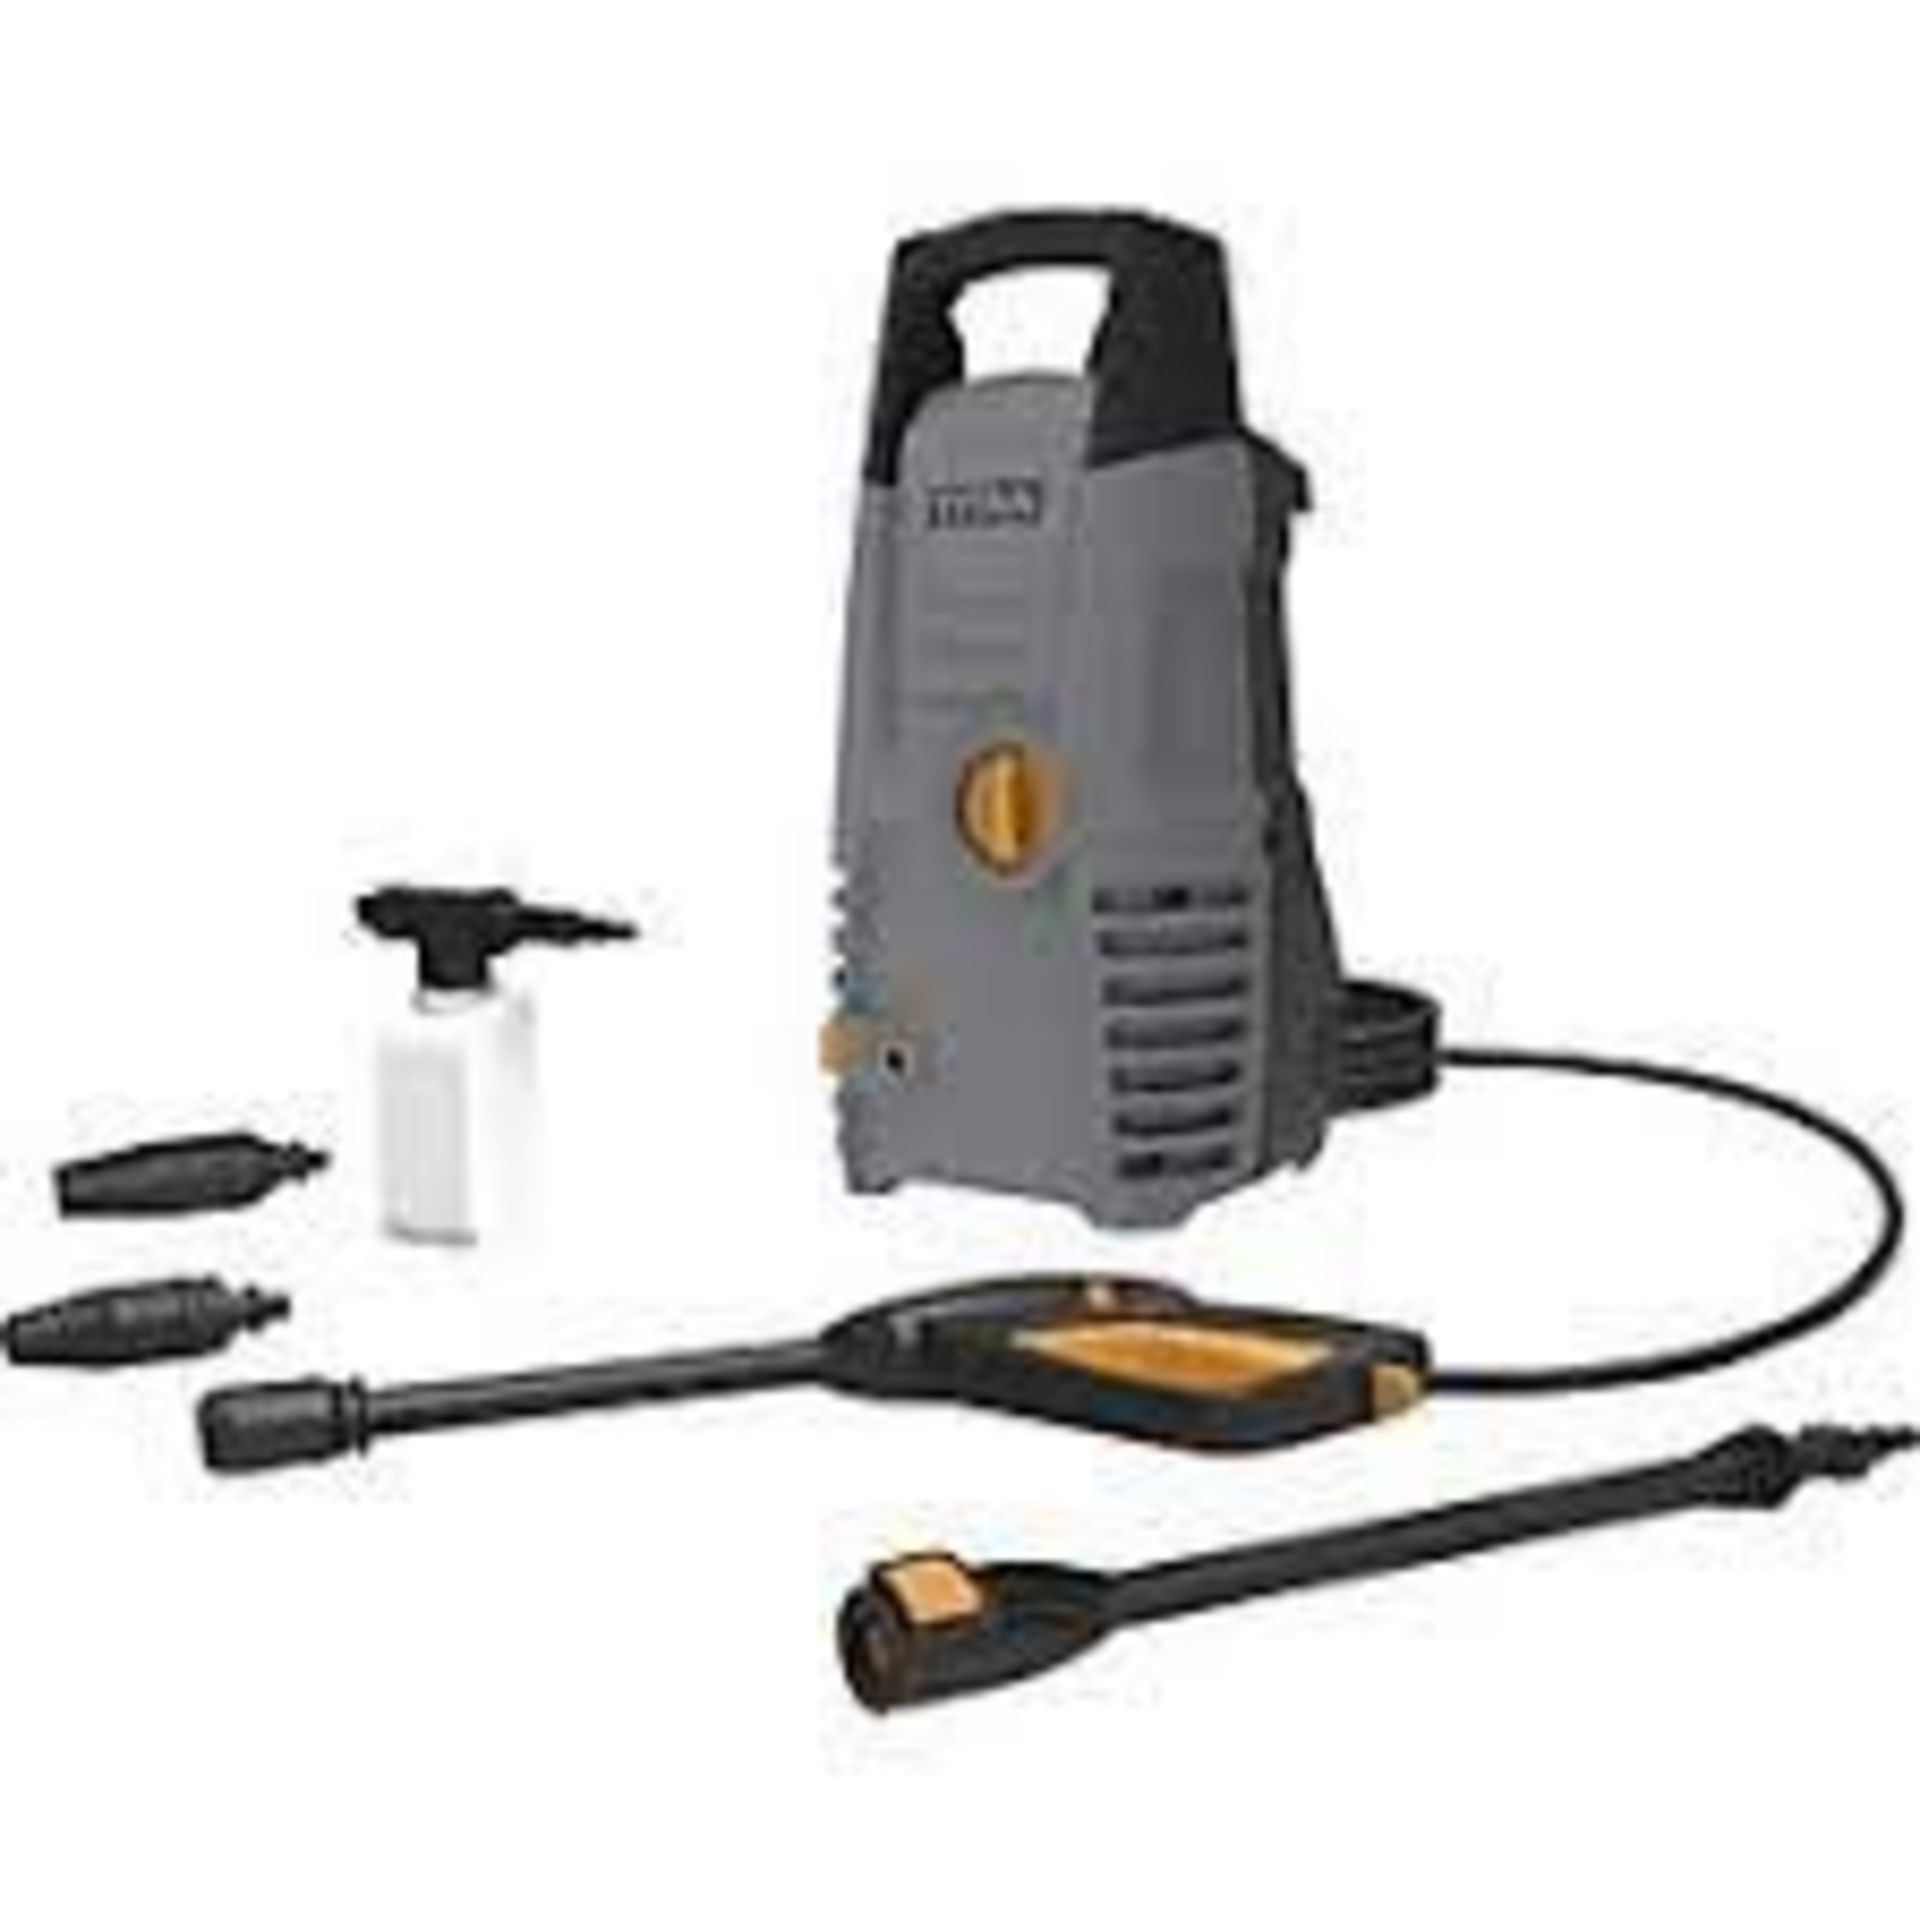 4 x TITAN 100BAR ELECTRIC HIGH PRESSURE WASHER 1.3KW 230V. - R14.13. Compact design with space-